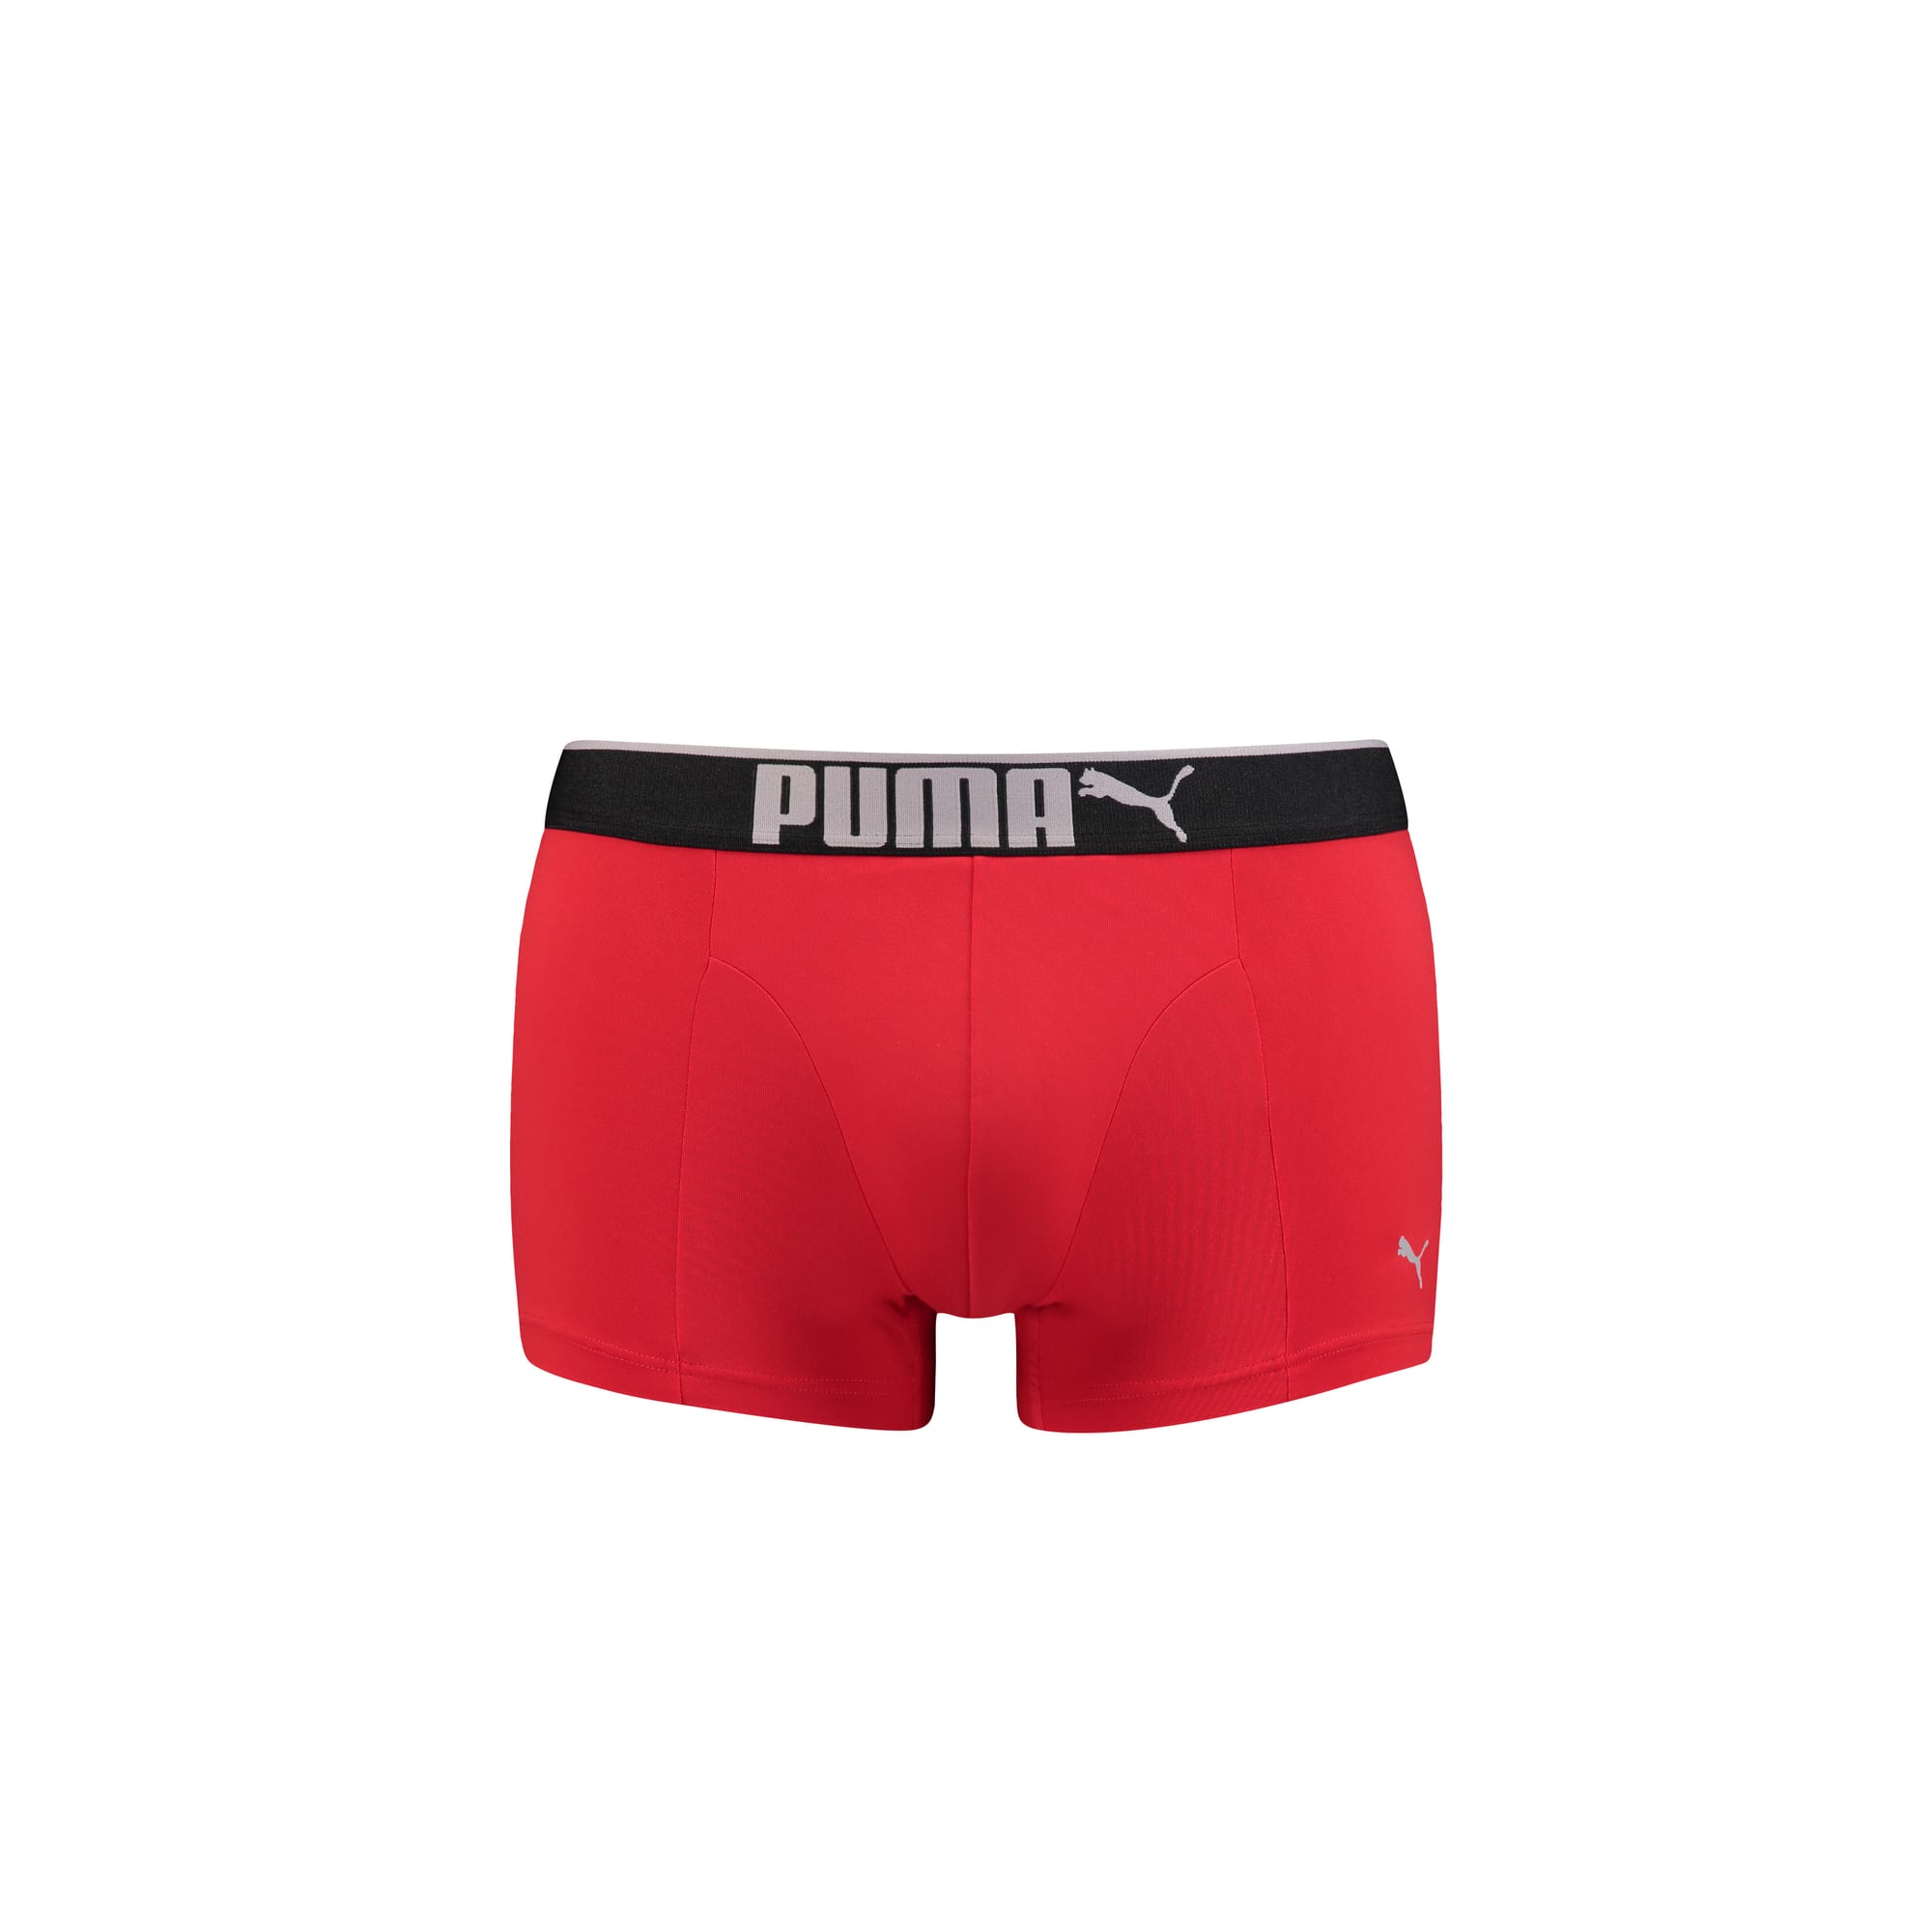 Men's Lifestyle Trunk 1 Pack, High Risk Red, large-SEA